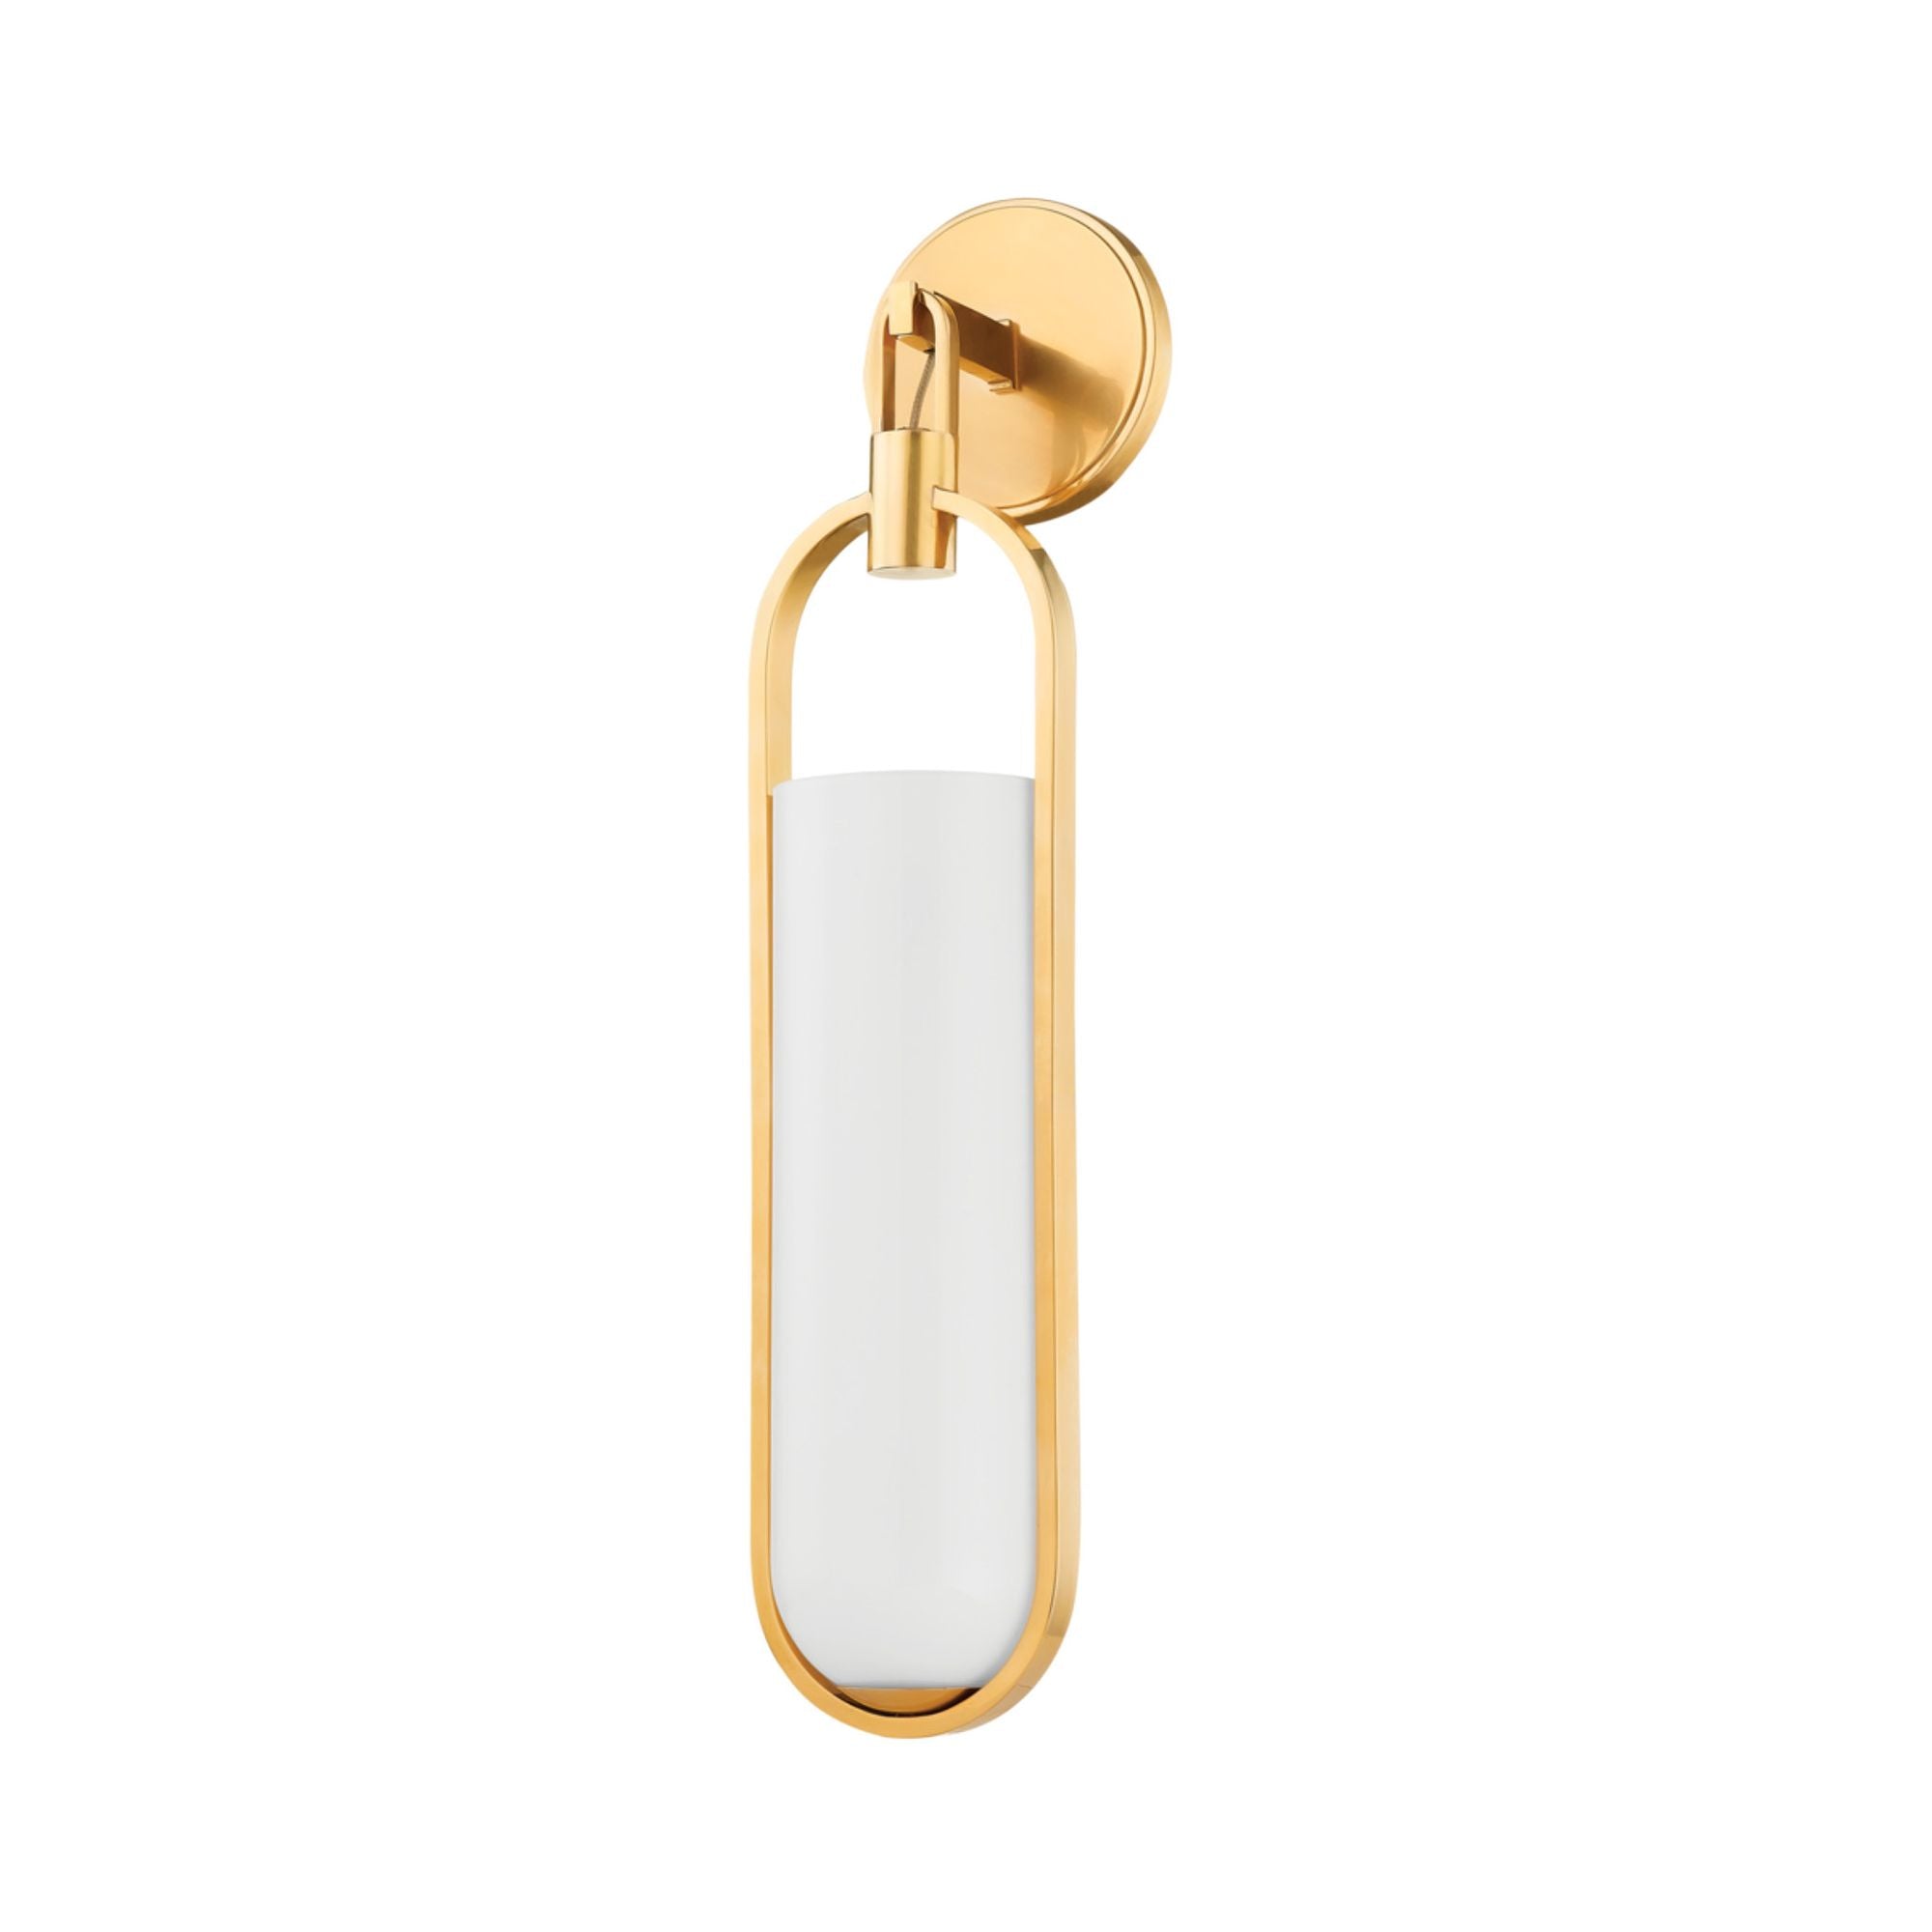 Lorimer 1 Light Wall Sconce in Aged Brass